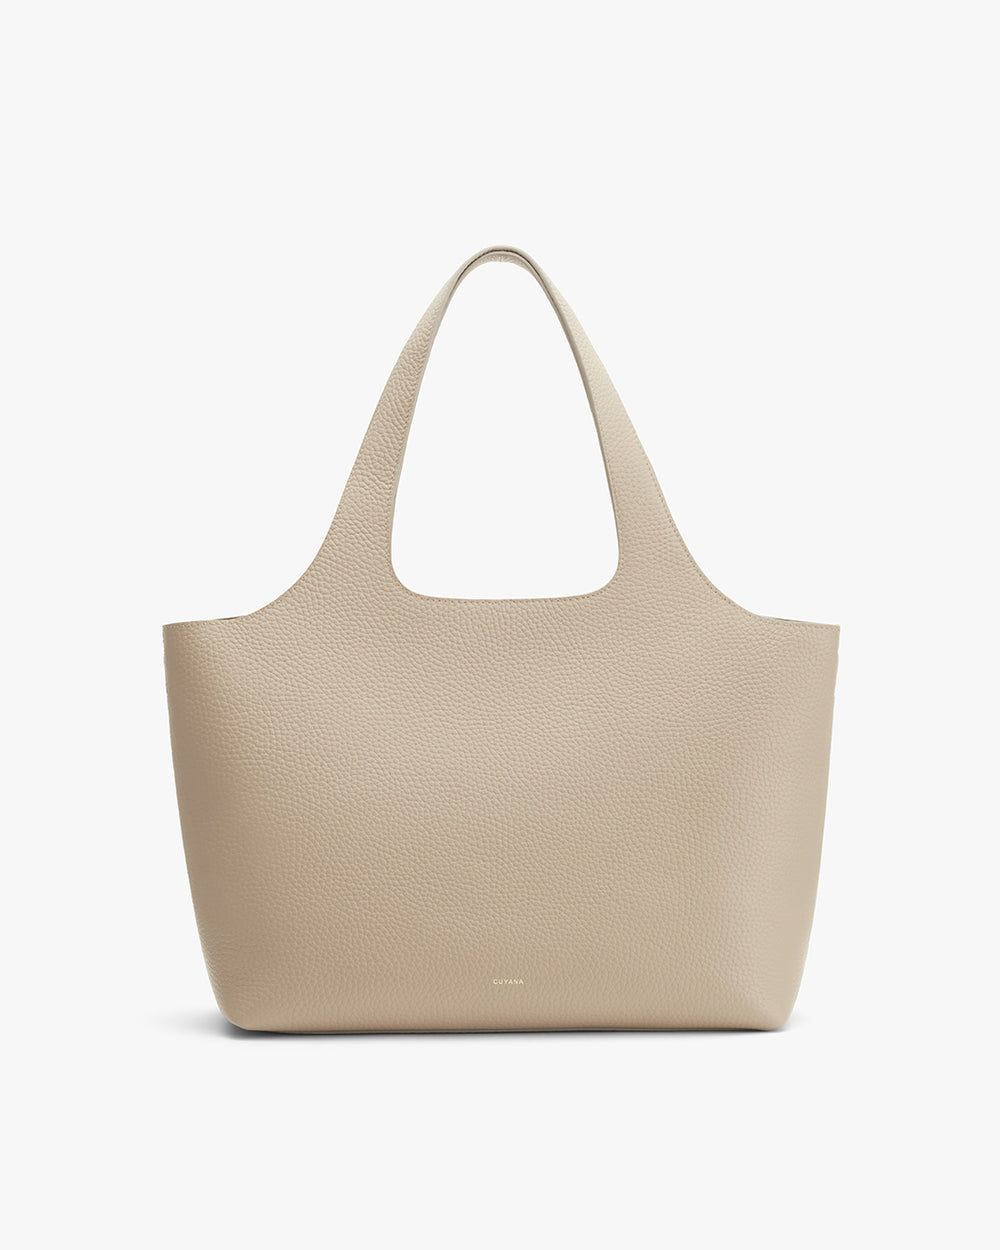 Large tote bag on a plain background.